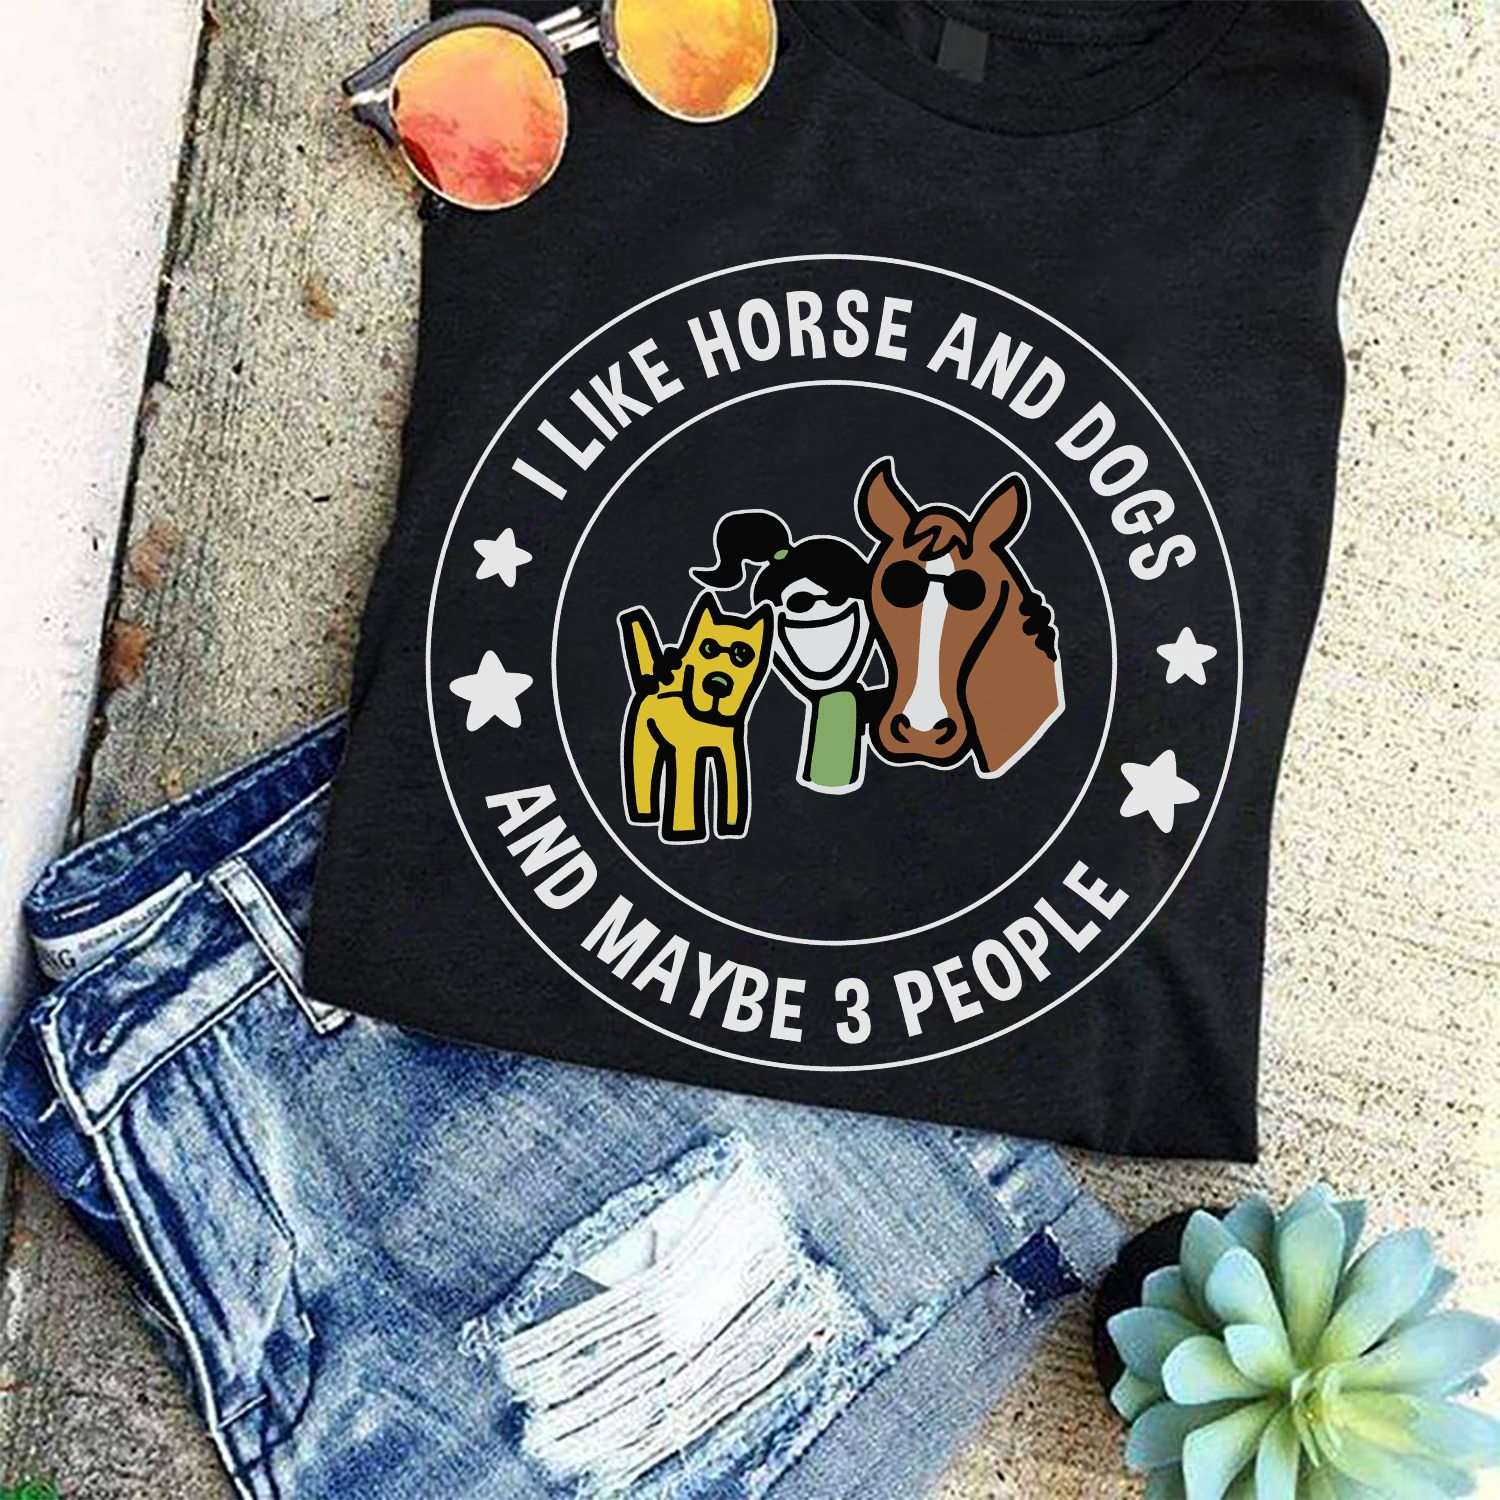 I like horse and dogs and maybe 3 people - Girl loves animals